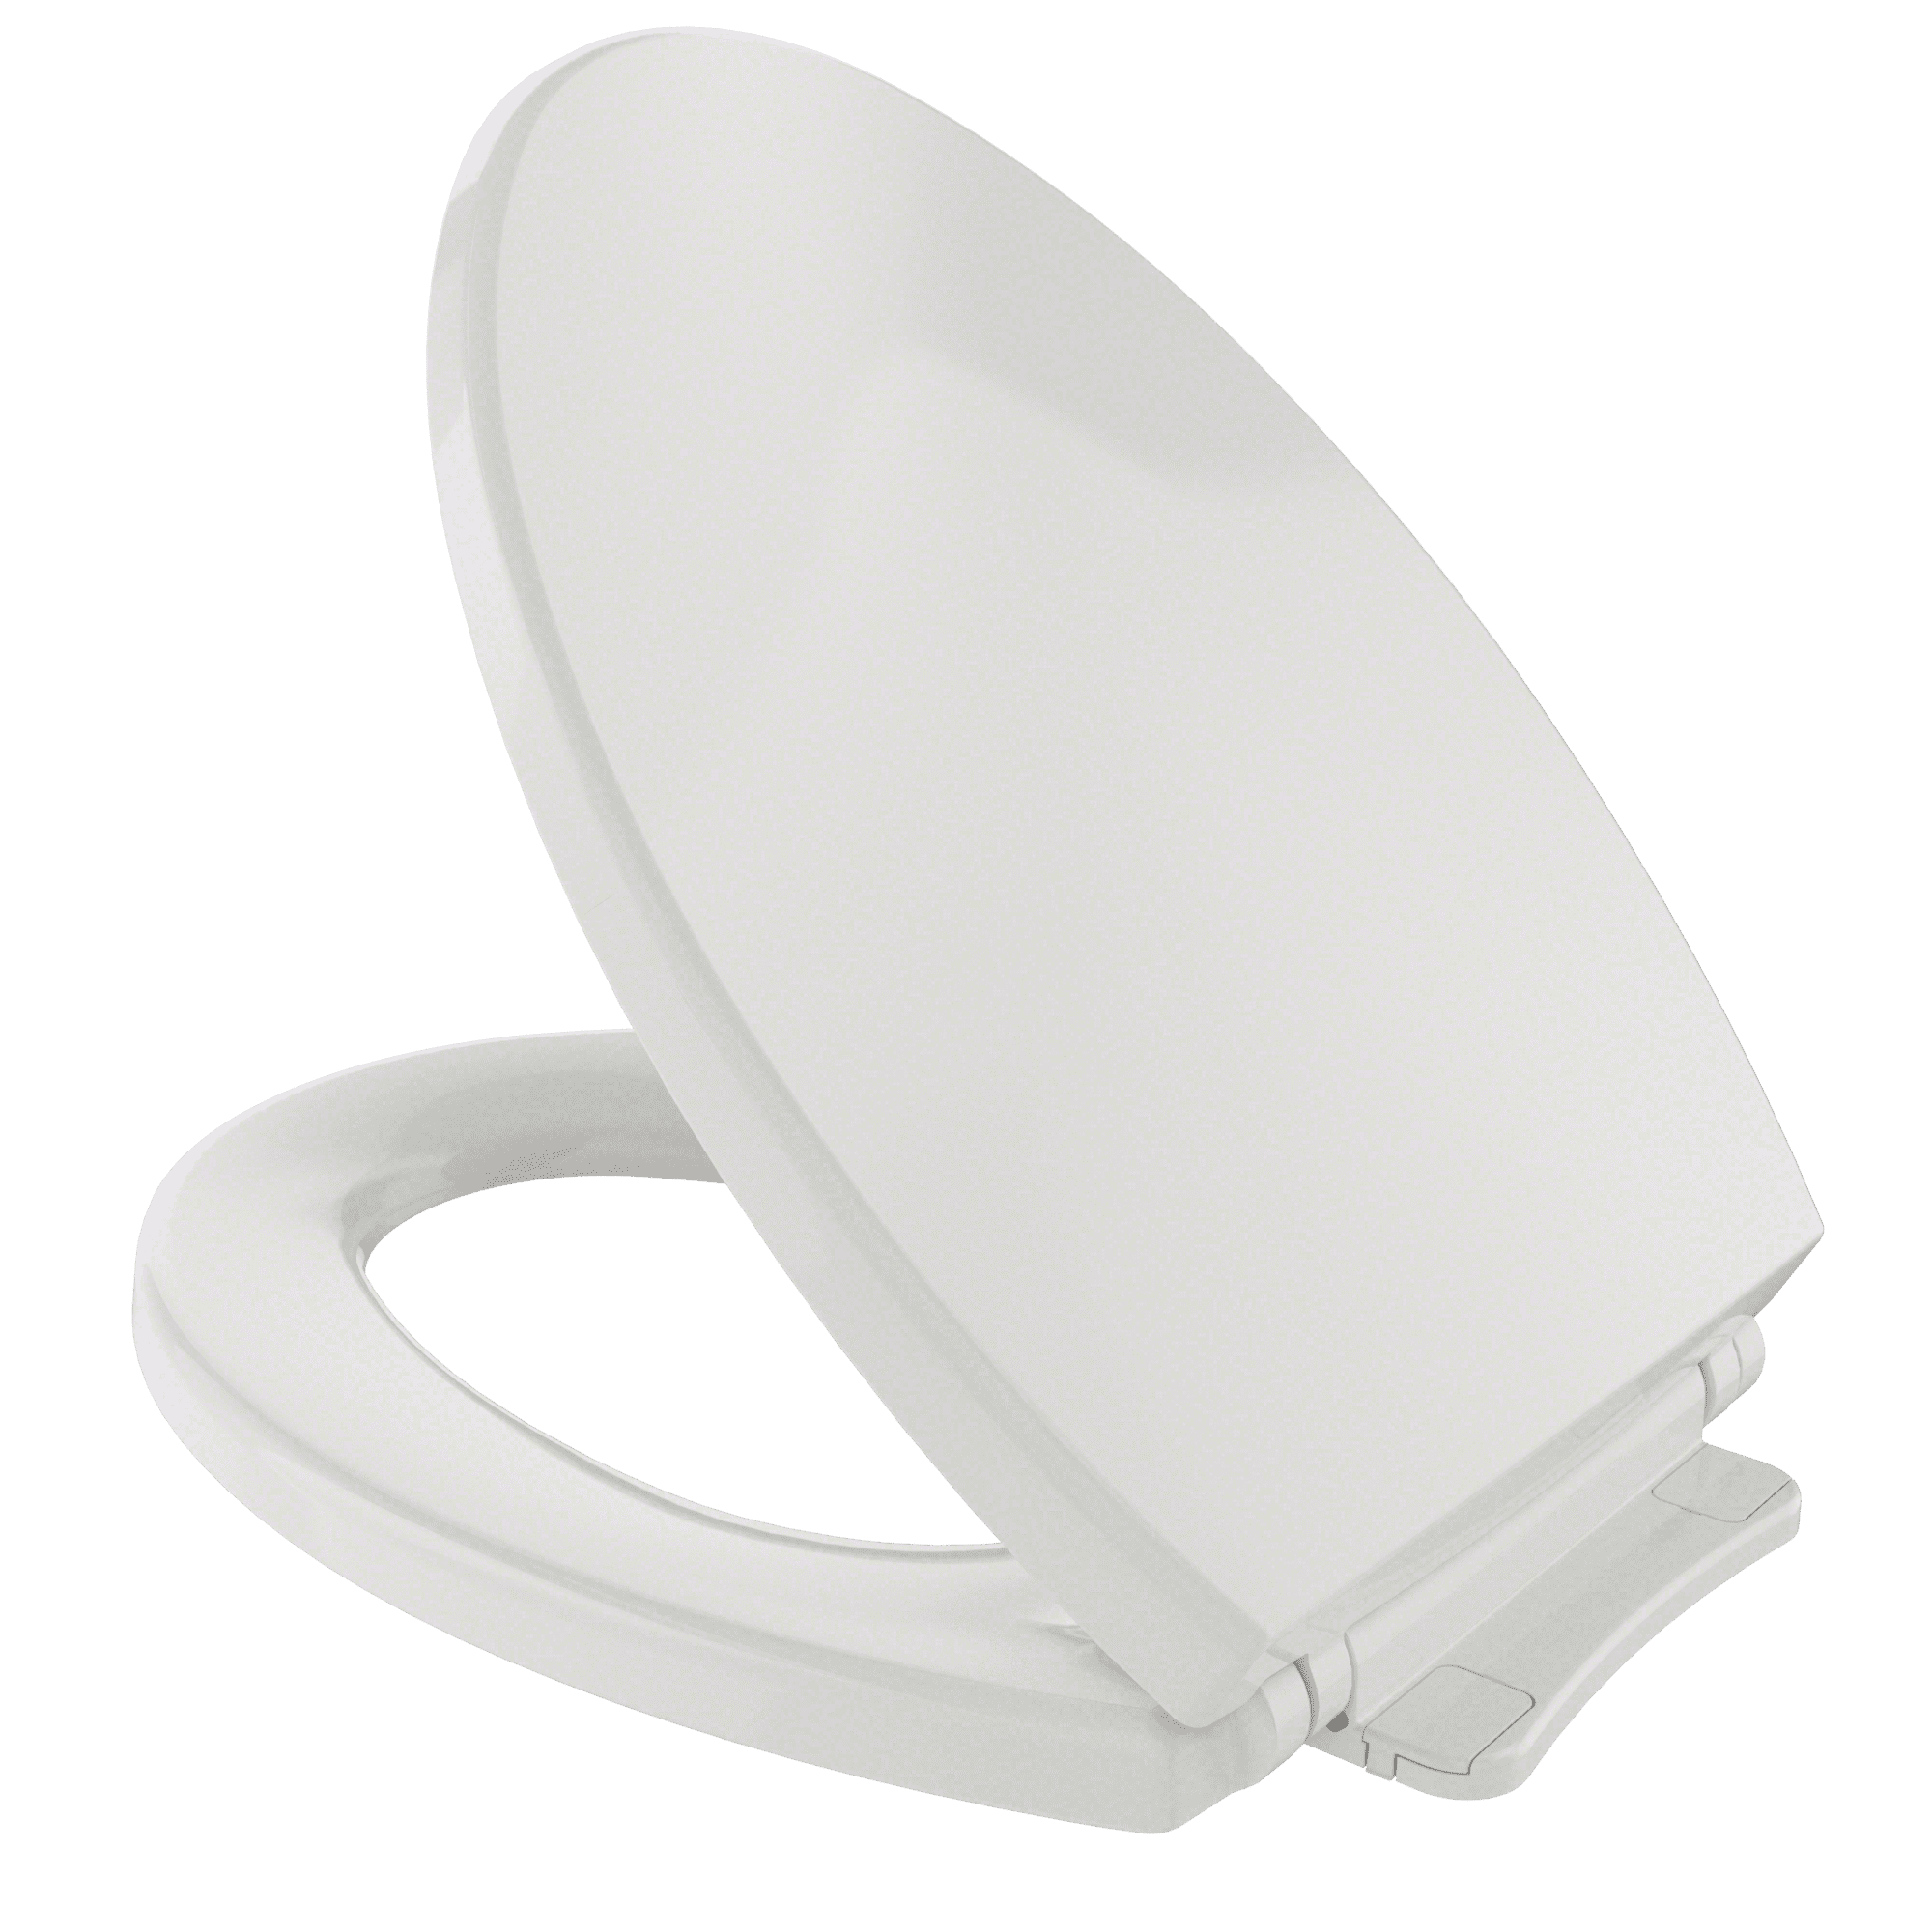 Ss11411 Slow Close Elongated Toilet Seat, Colonial White